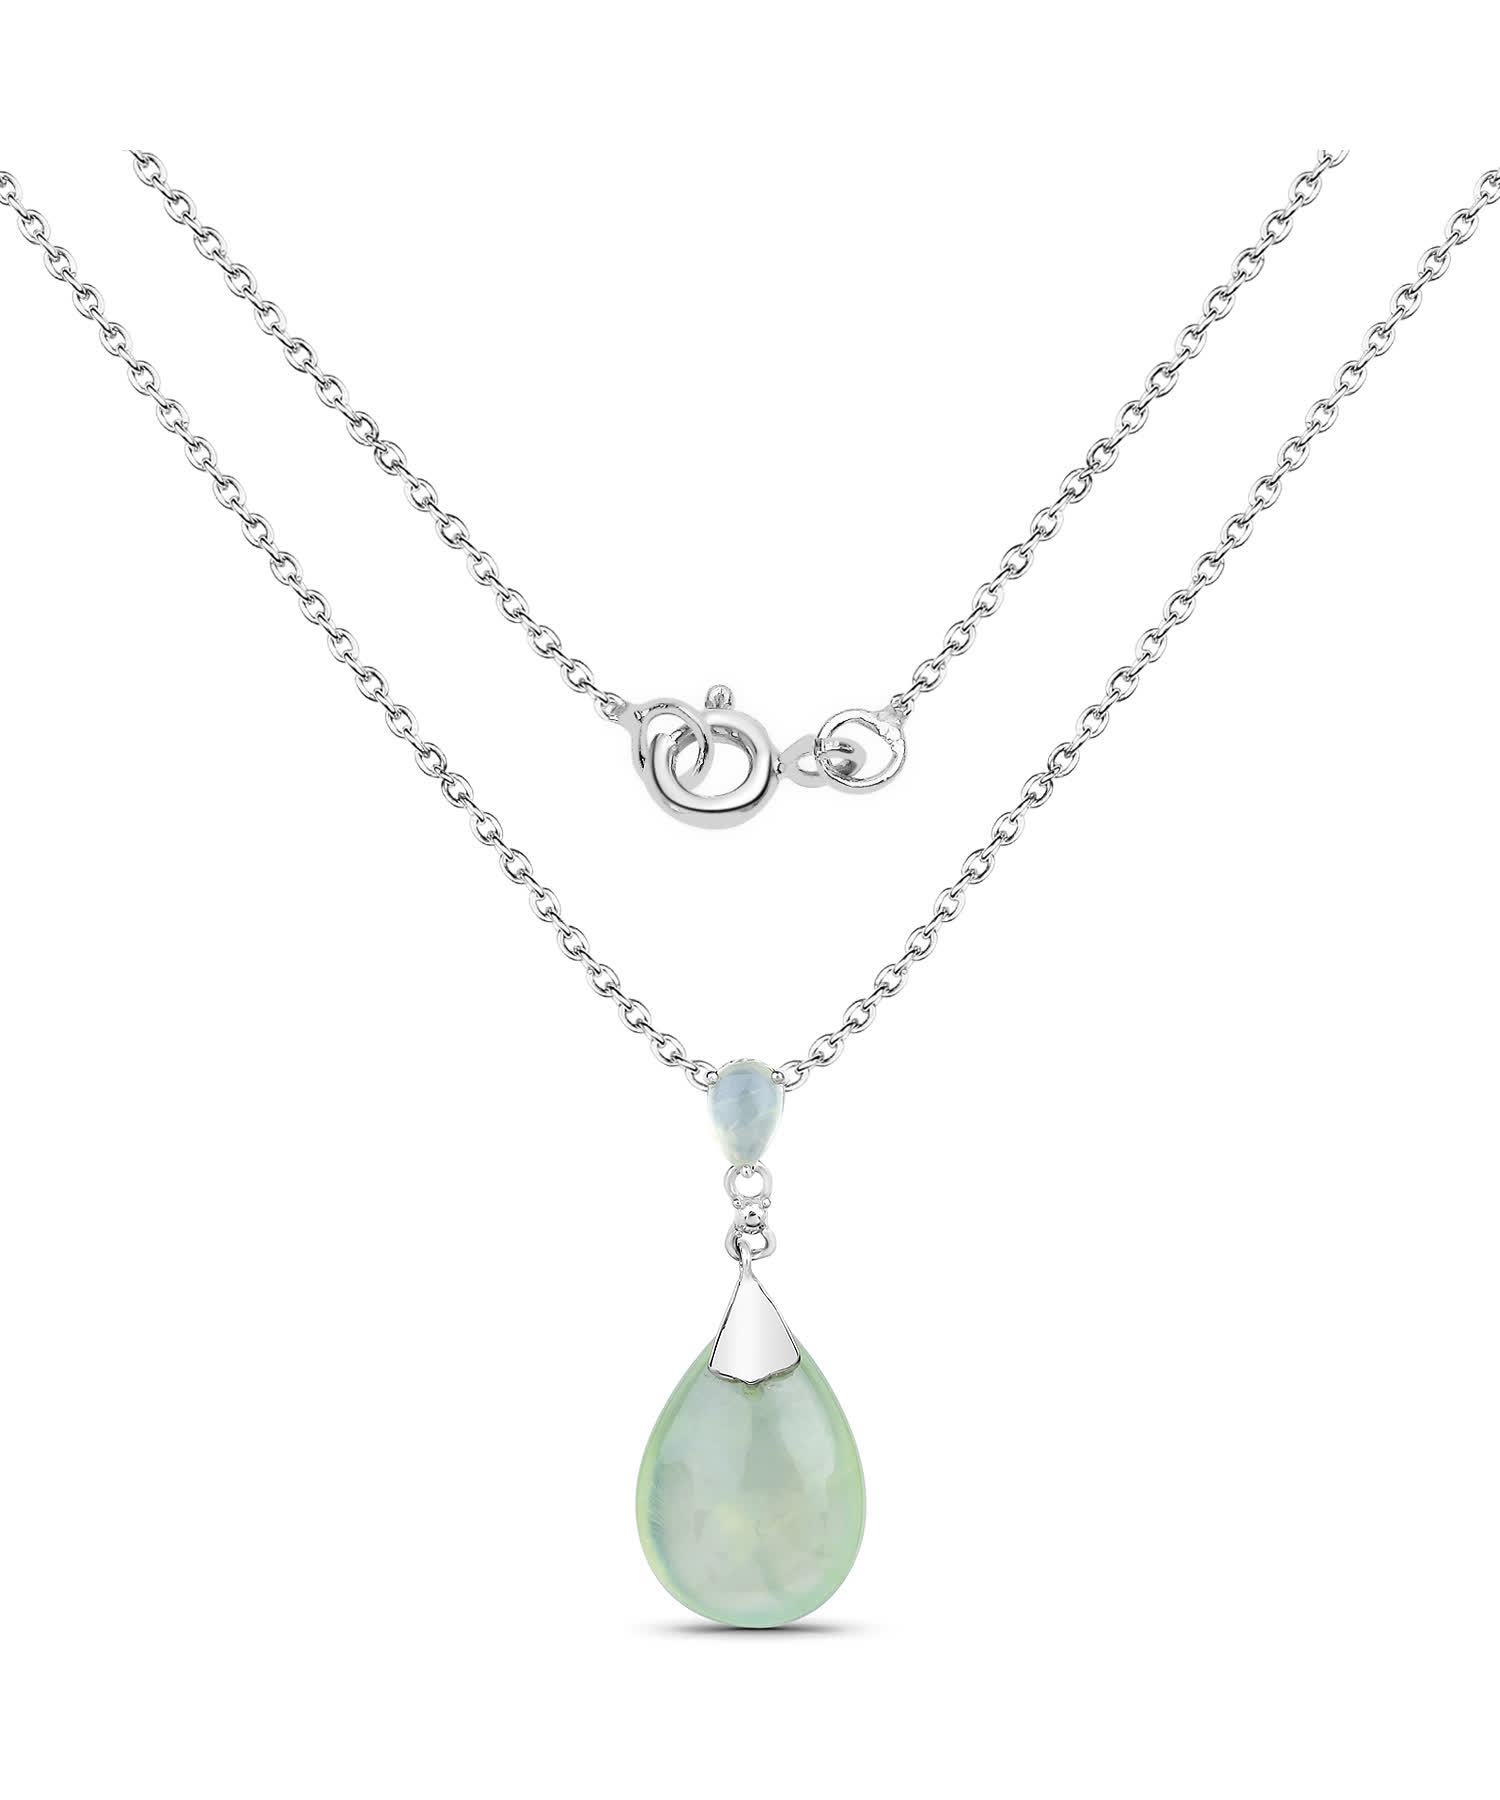 10.12ctw Natural Prehnite Rhodium Plated 925 Sterling Silver Drop Pendant With Chain View 2